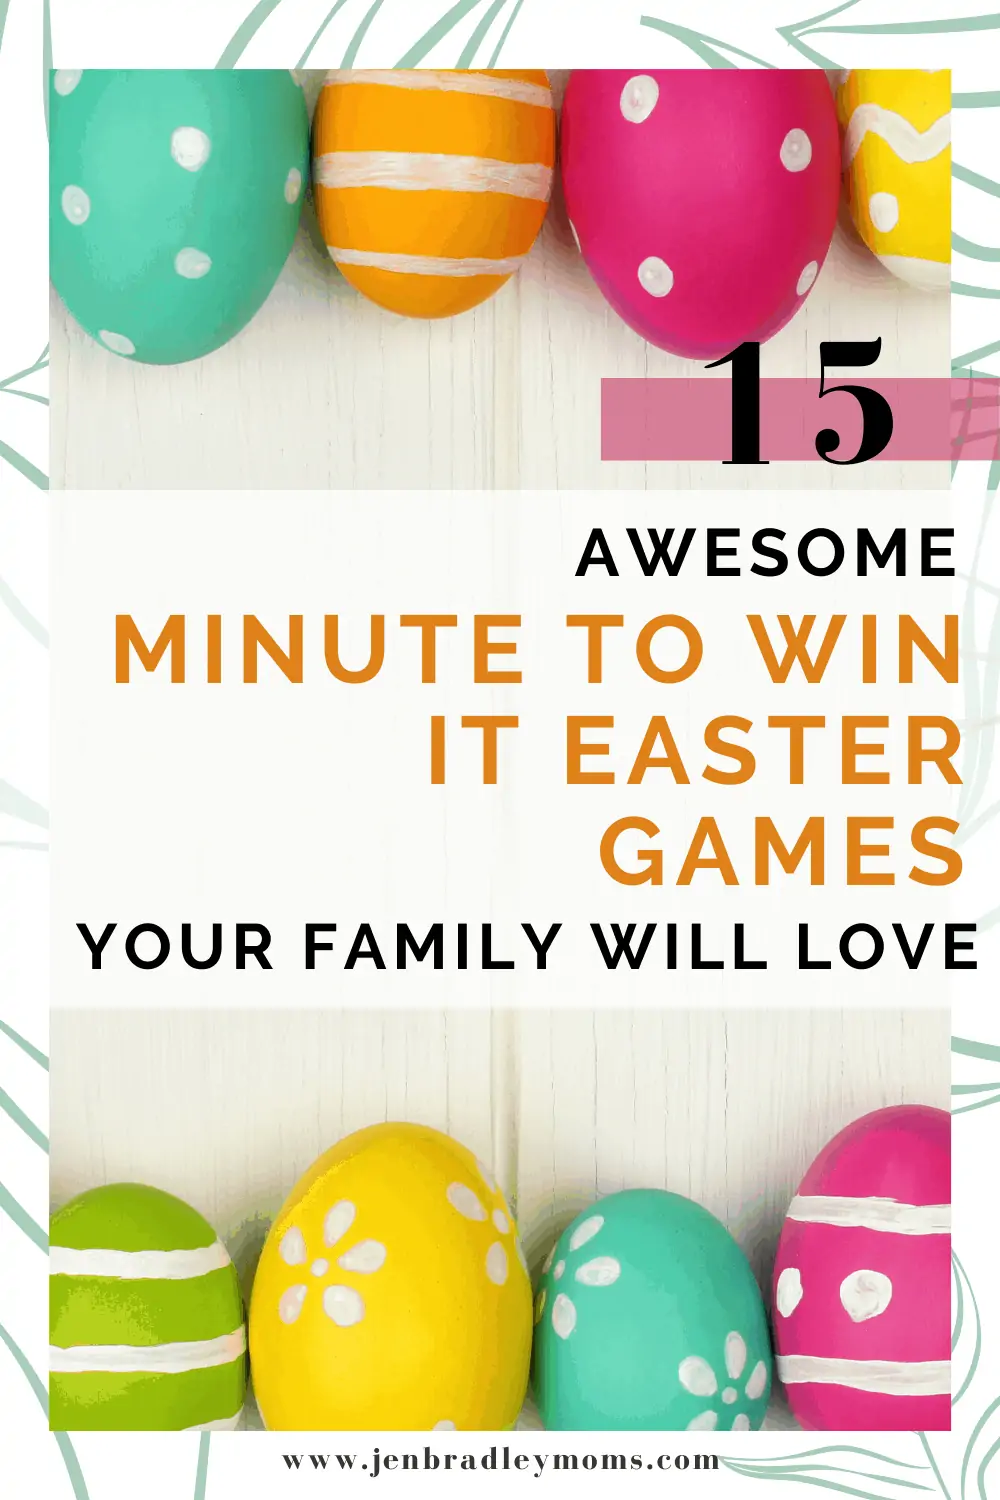 15 Awesome Minute to Win It Easter Games Your Family Will Love